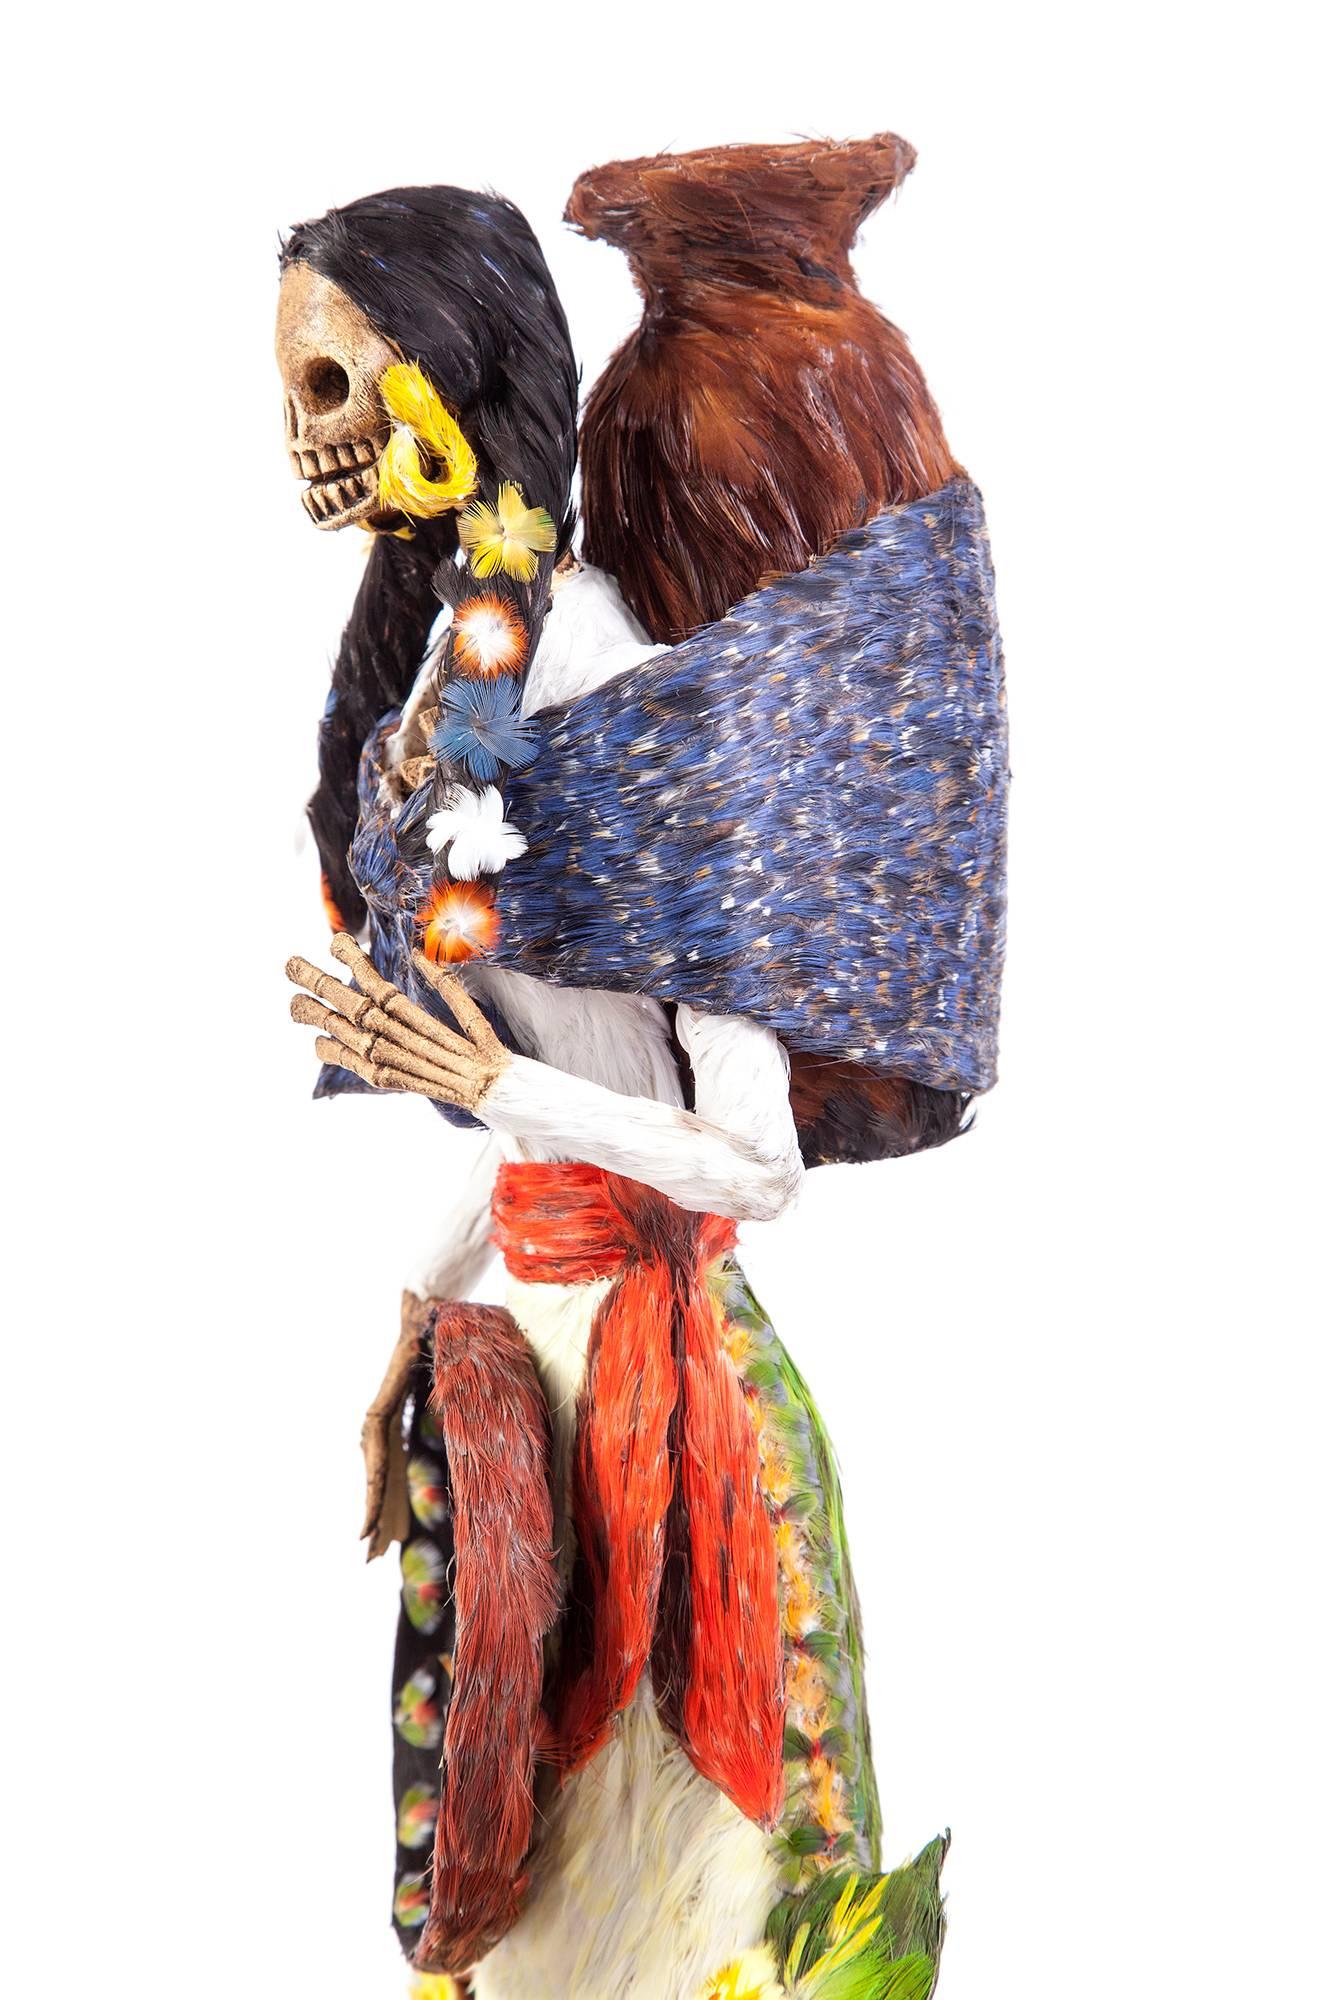 14'' Catrina vendedora Mexican Folk Art - Brown Abstract Sculpture by Jessica Yazmin Fuerte Alejo